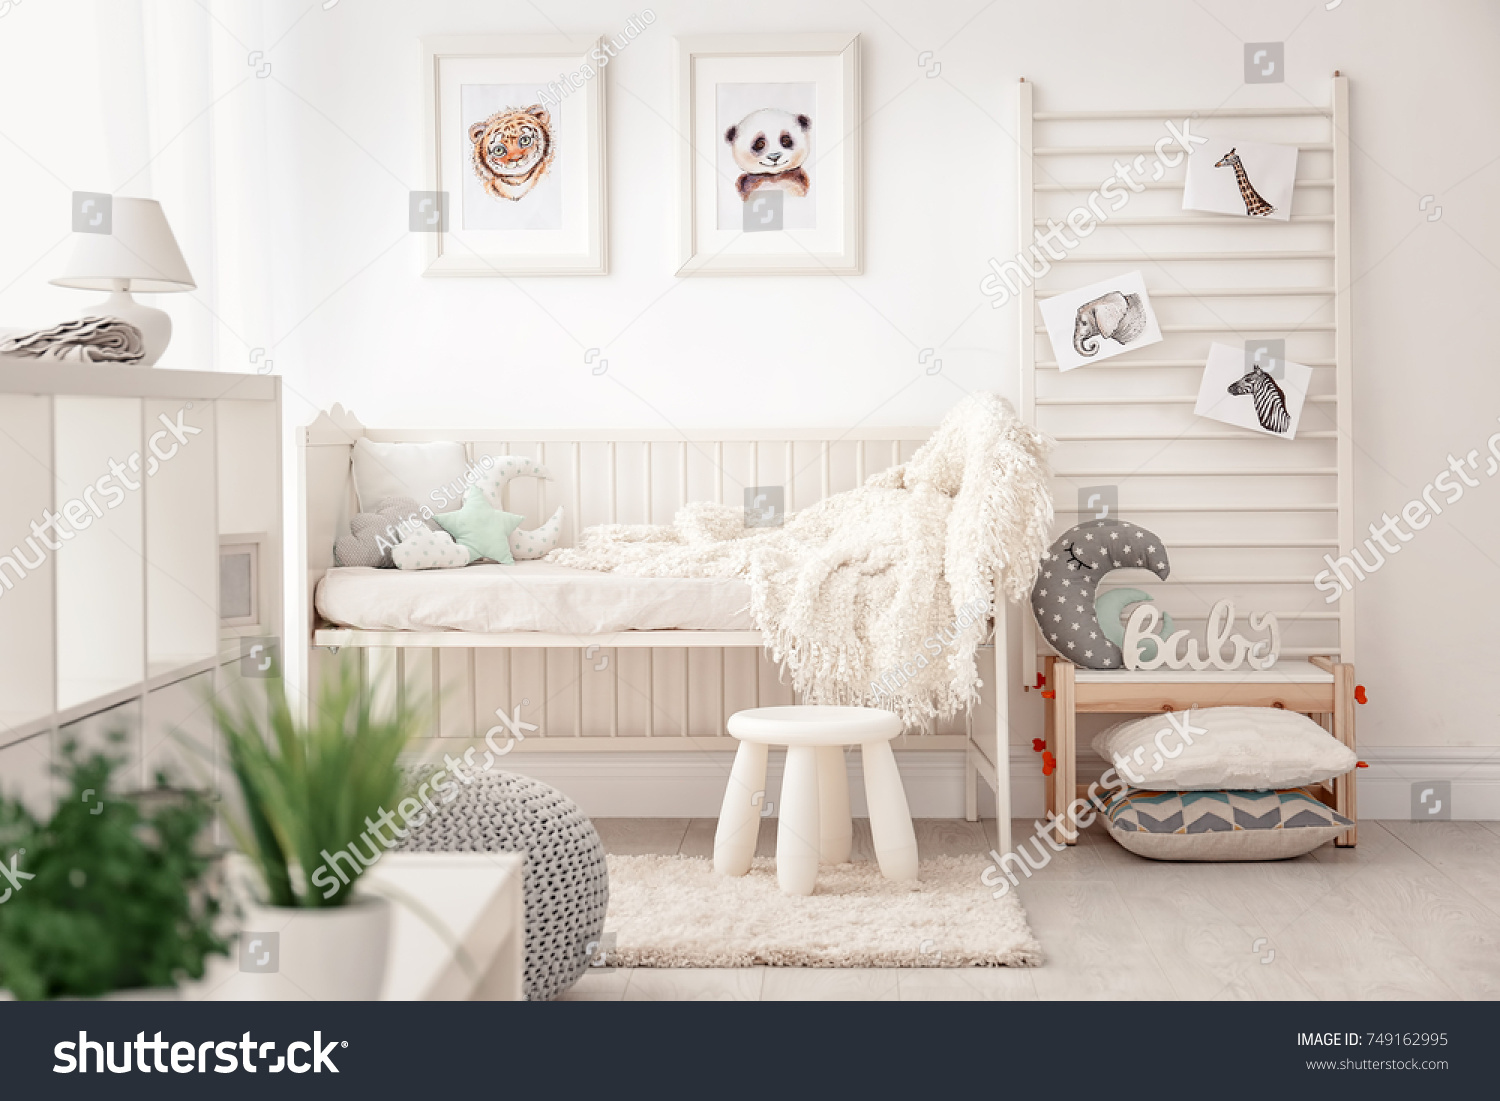 Baby bedroom decorated with pictures of animals #749162995